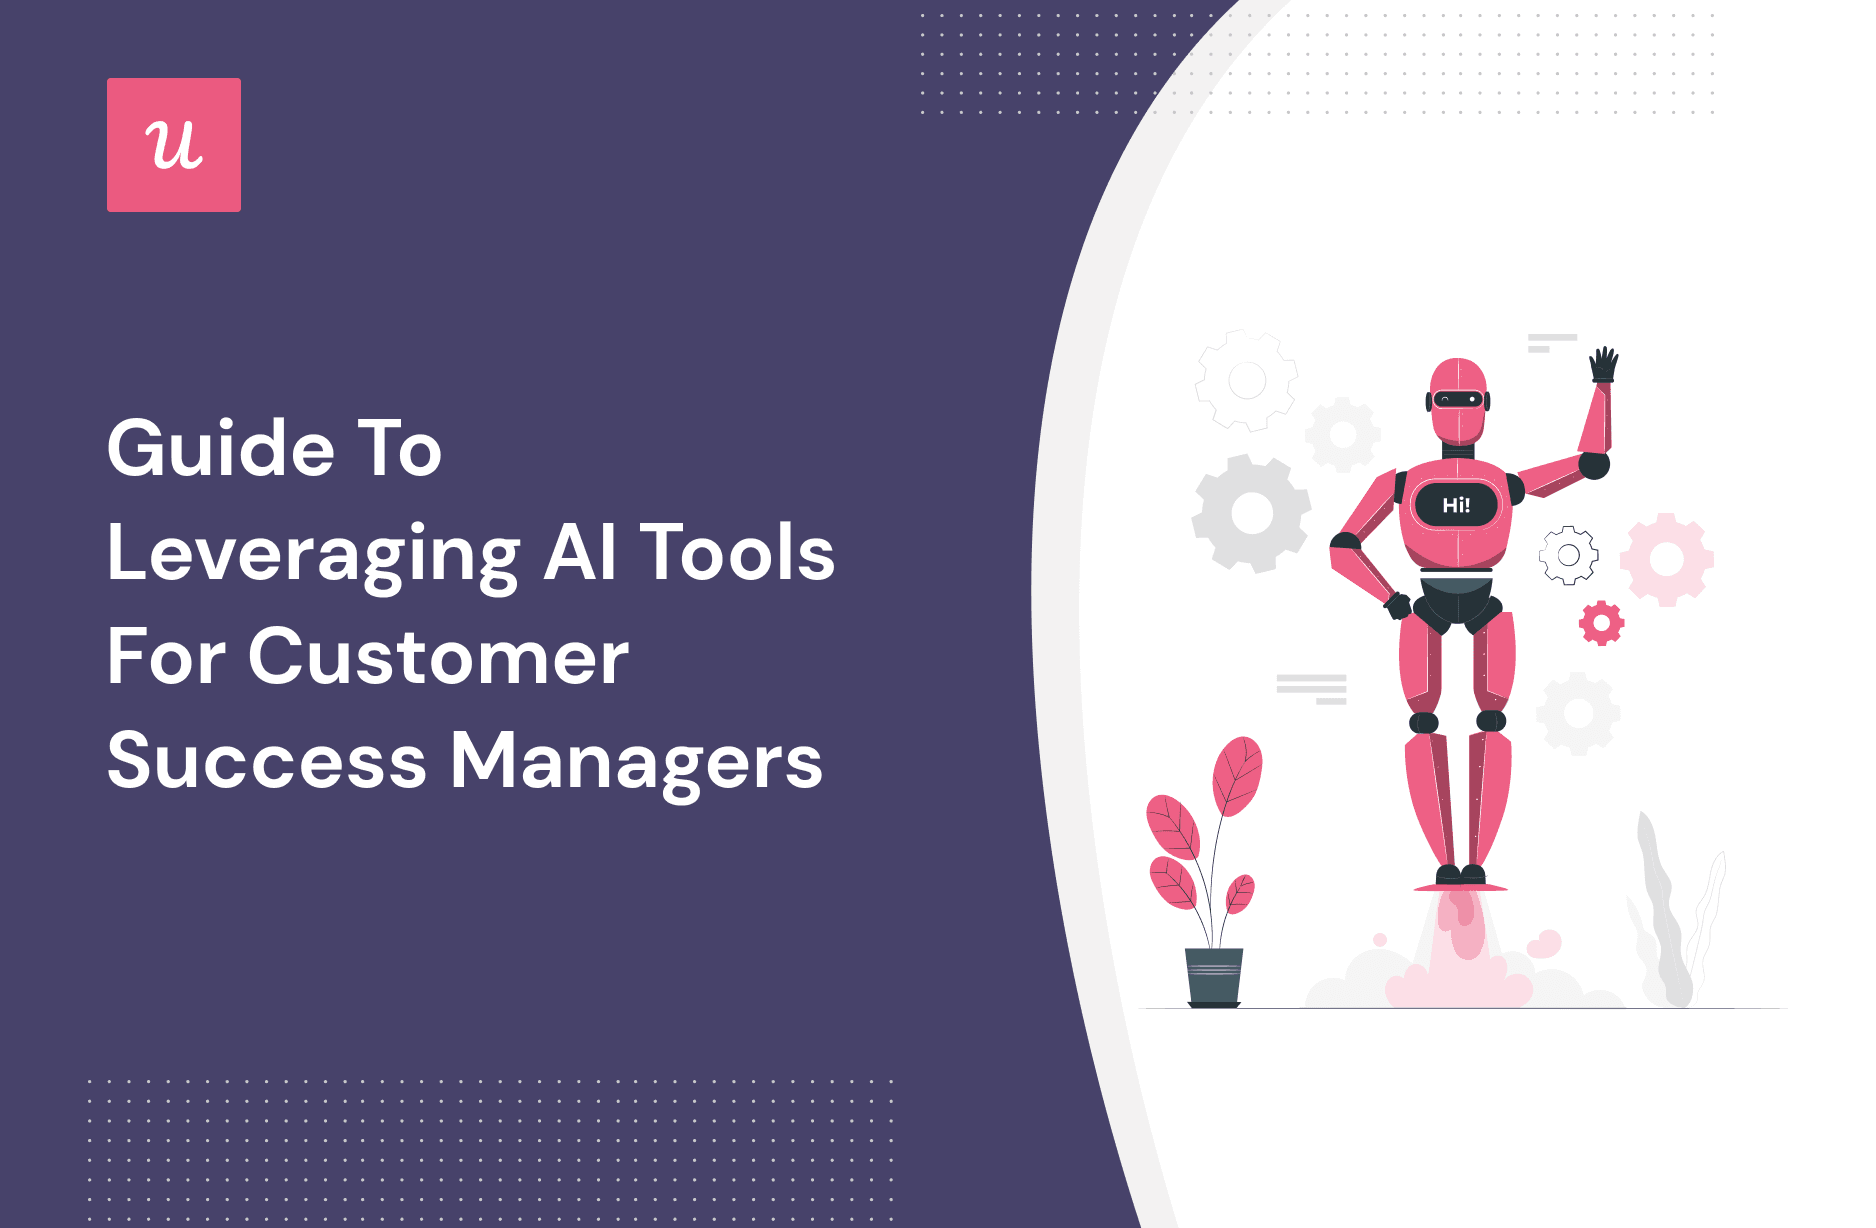 Guide To Leveraging AI Tools For Customer Success Managers cover